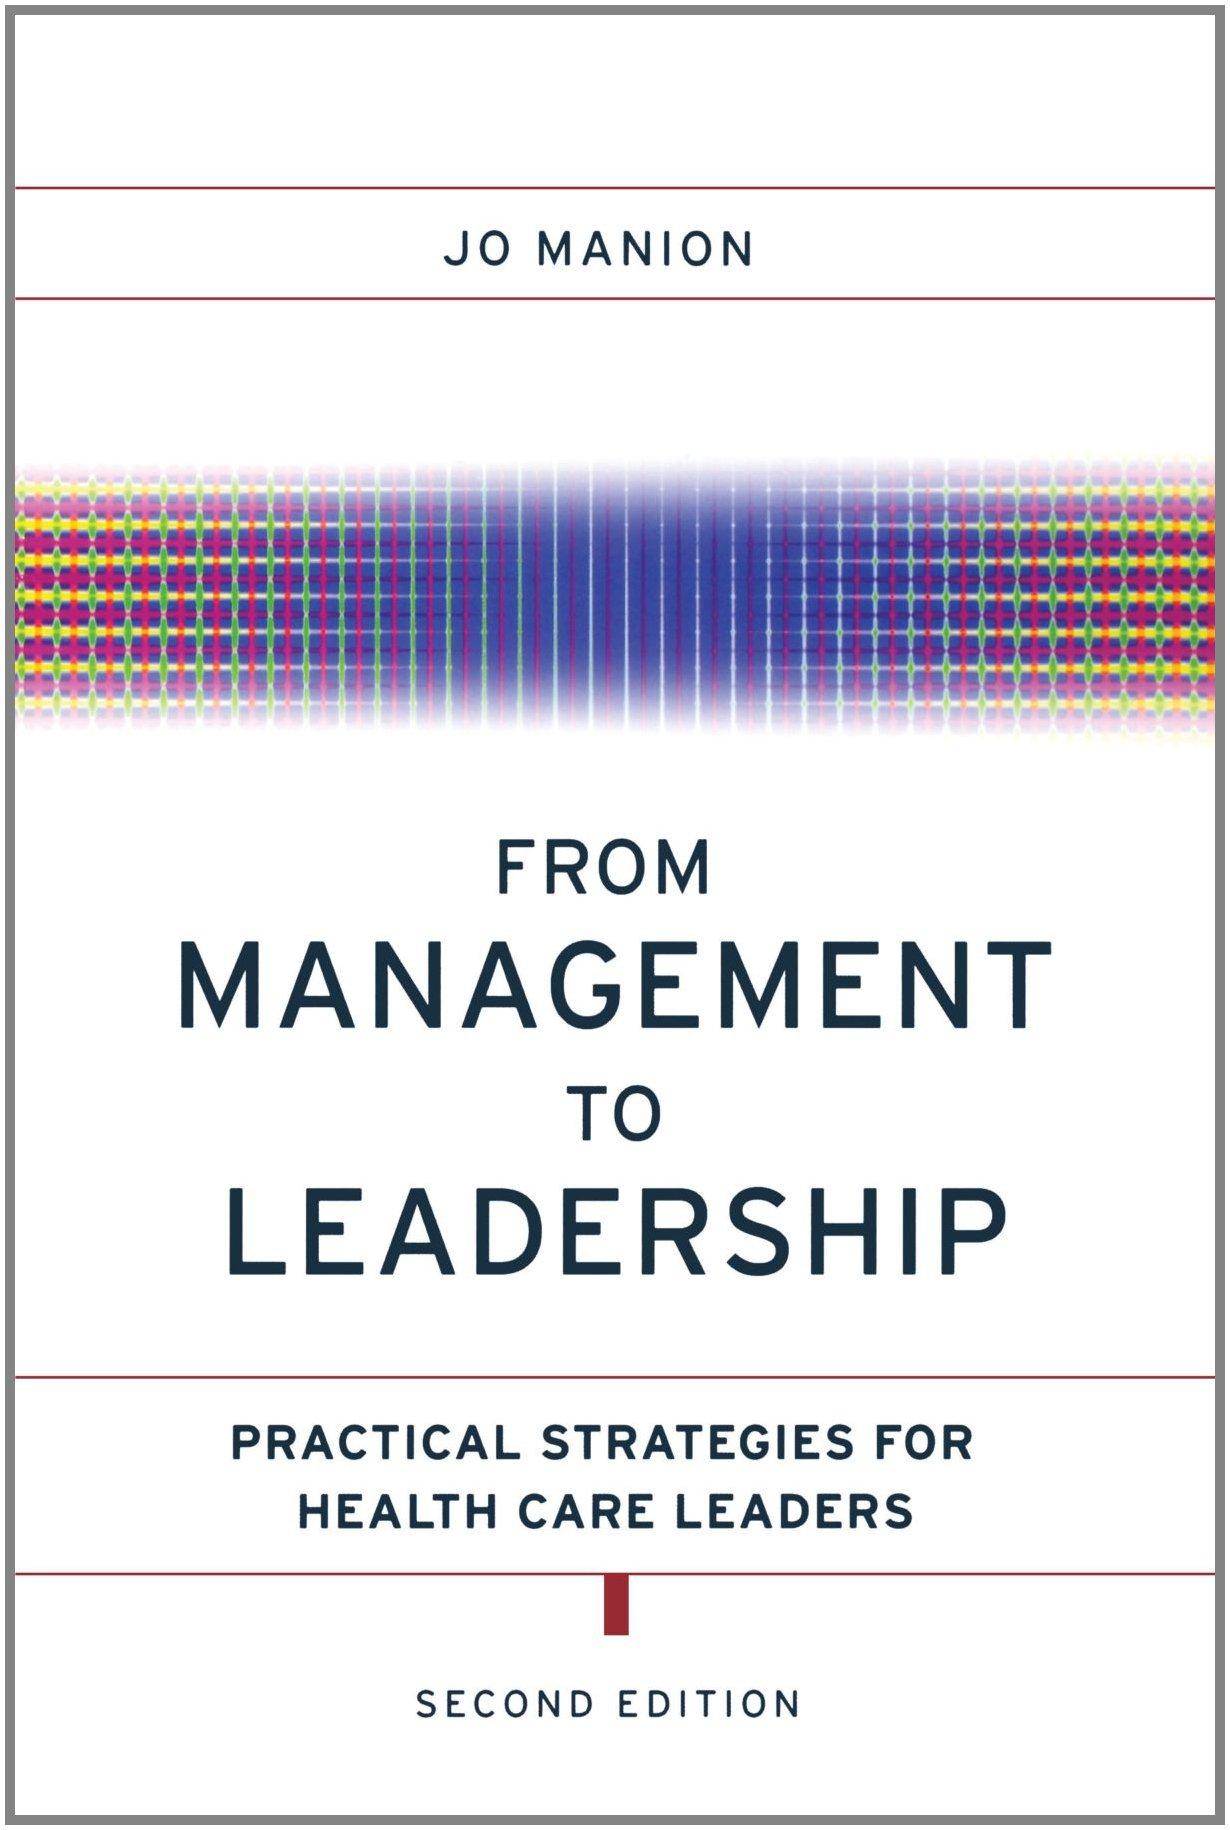 from management to leadership practical strategies for health care leaders 2nd edition jo manion 0787979295,